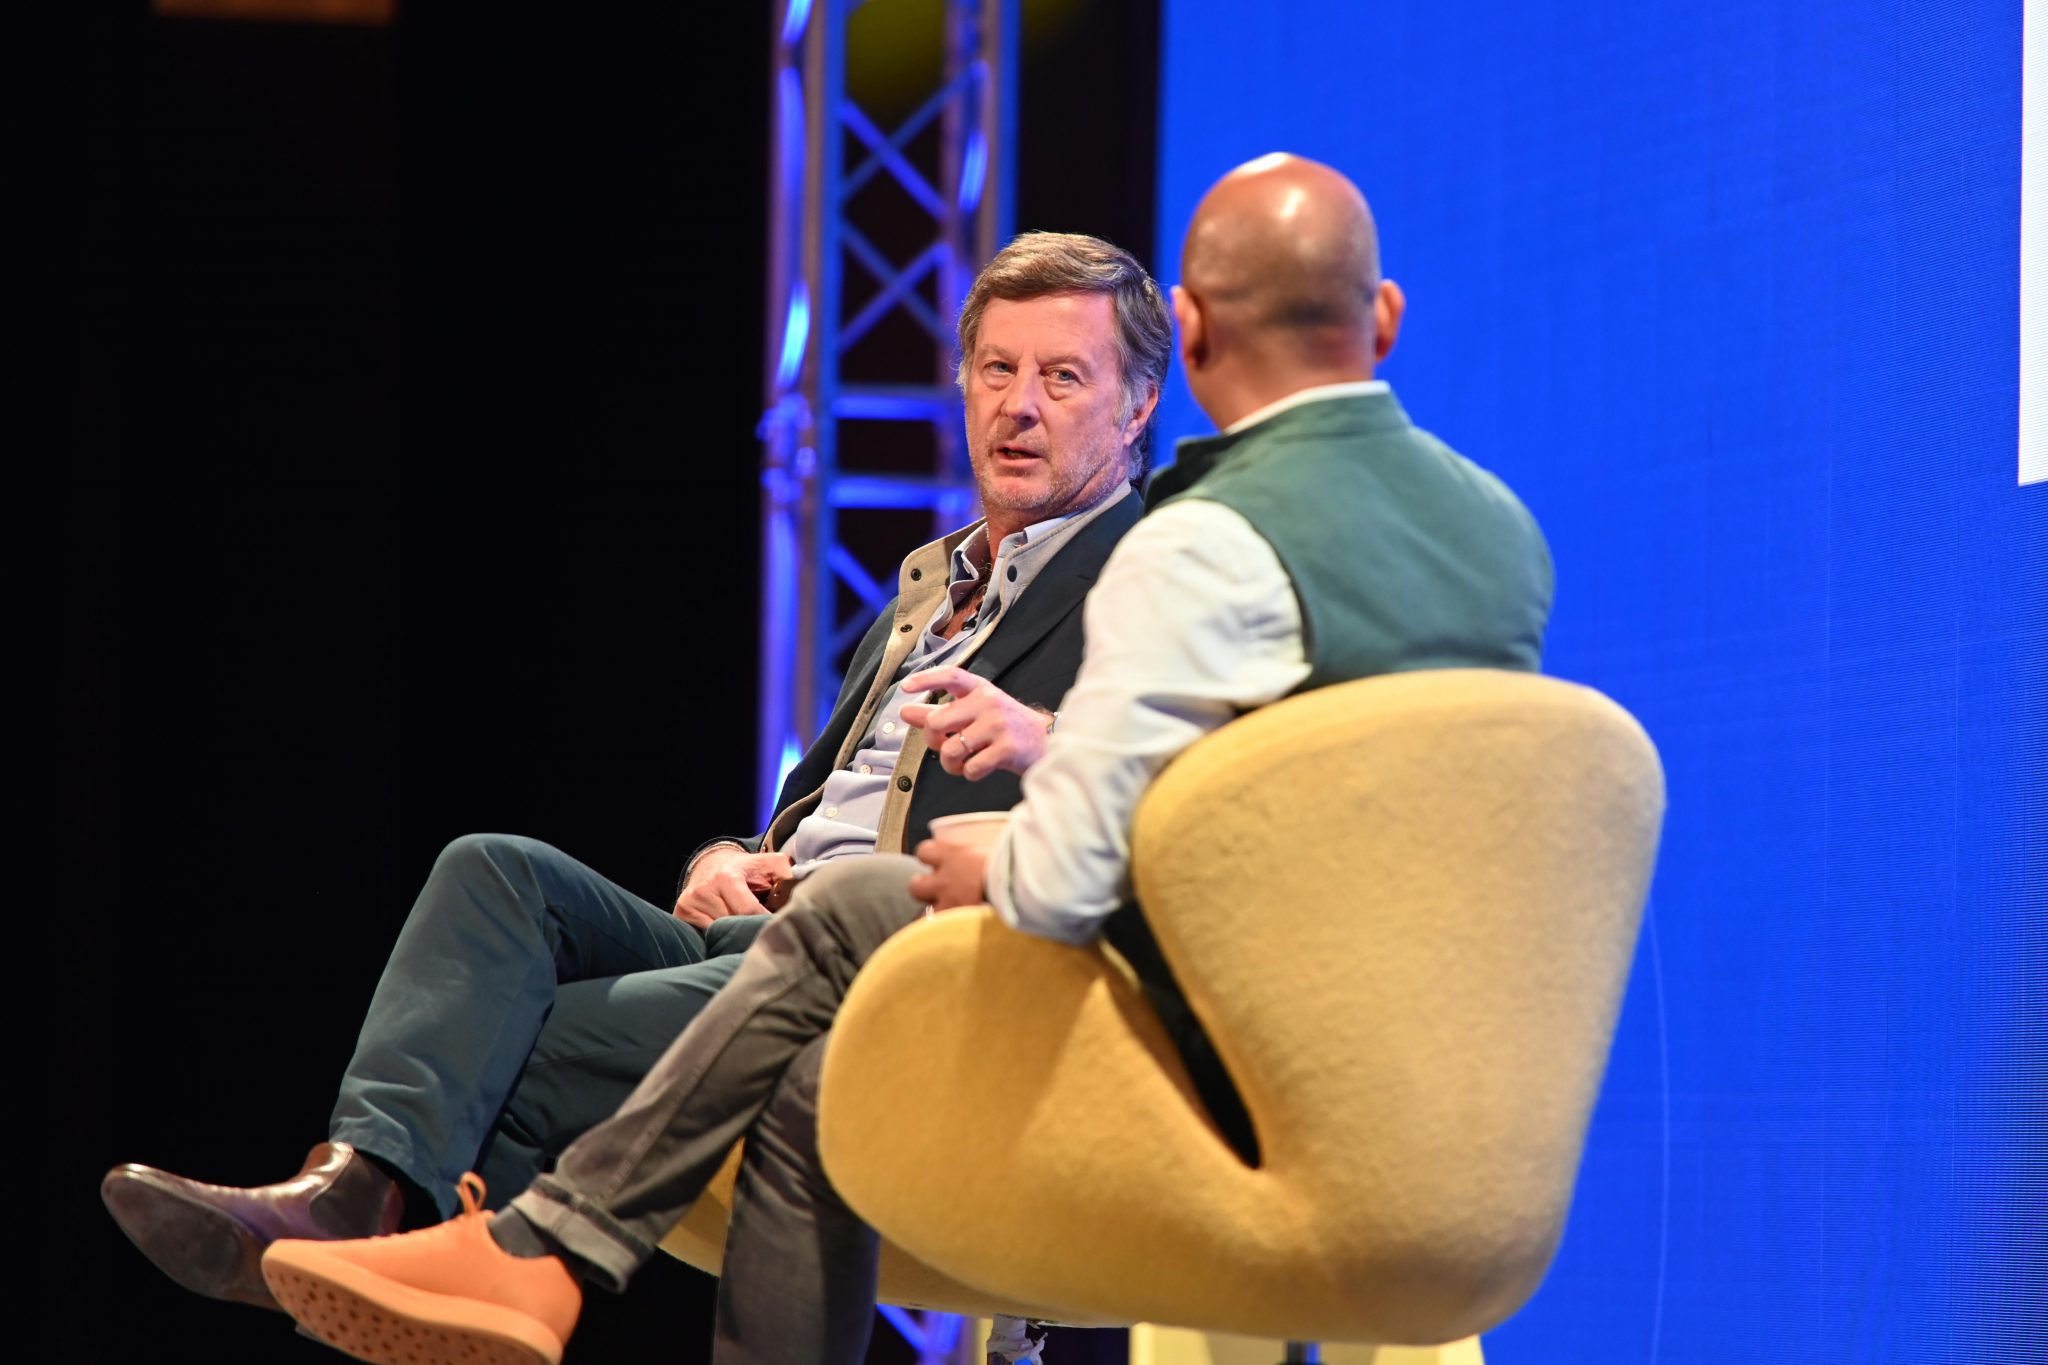 Accor CEO Sebastien Bazin in conversation with Skift CEO and founder Rafat Ali at Skift Forum Europe in London on March 24, 2022. 